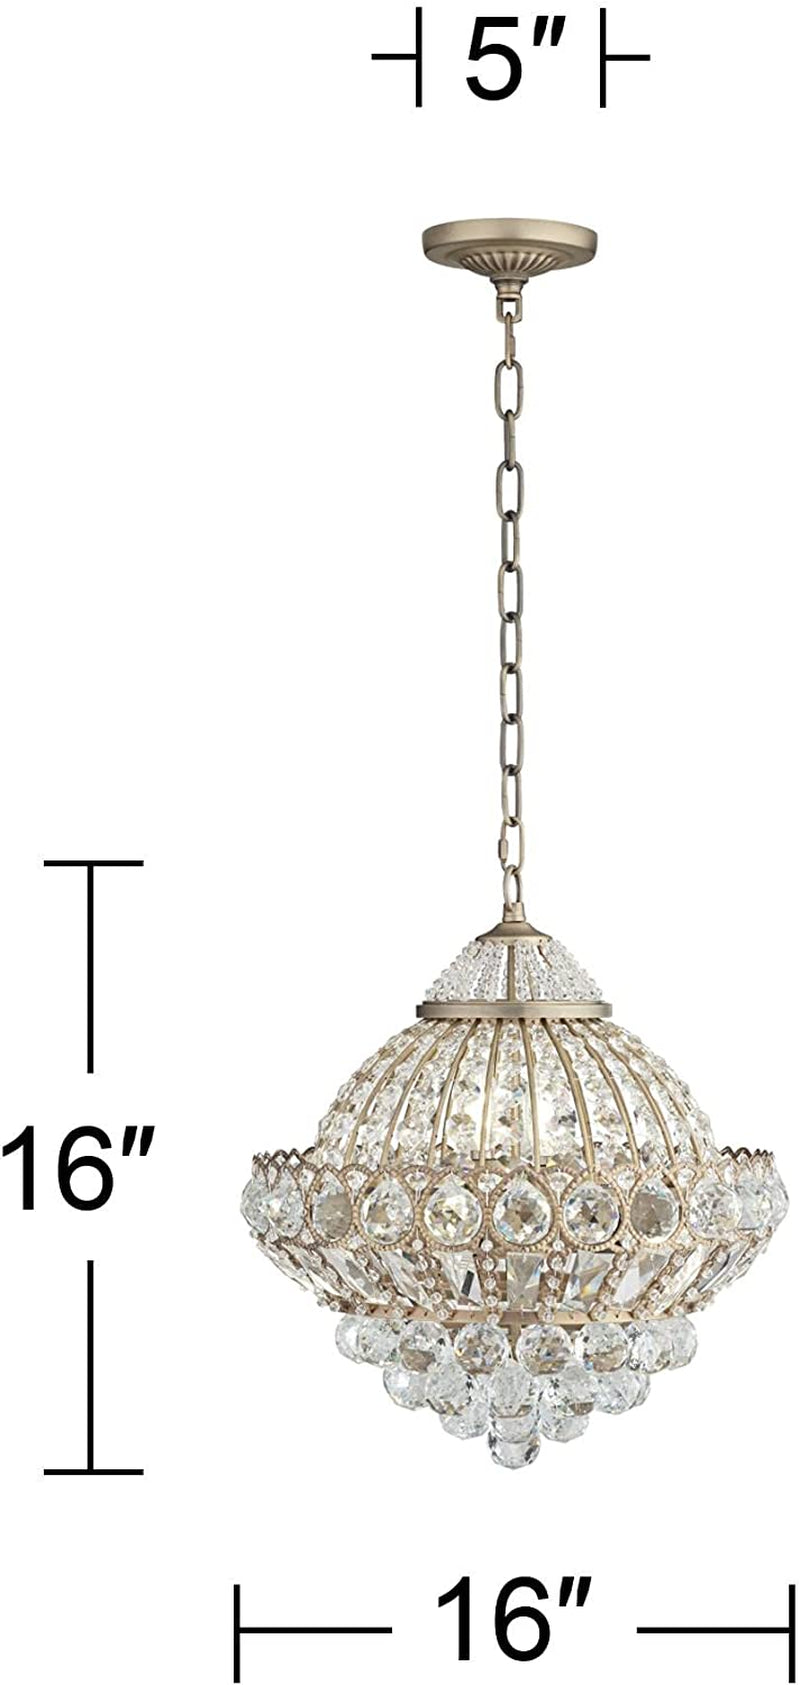 Wallingford Antique Brass Gold Chandelier Lighting 16" Wide Clear Crystal Shade 6-Light Fixture for Dining Room House Foyer Entryway Kitchen Bedroom Living Room High Ceilings - Vienna Full Spectrum Home & Garden > Lighting > Lighting Fixtures > Chandeliers Vienna Full Spectrum   